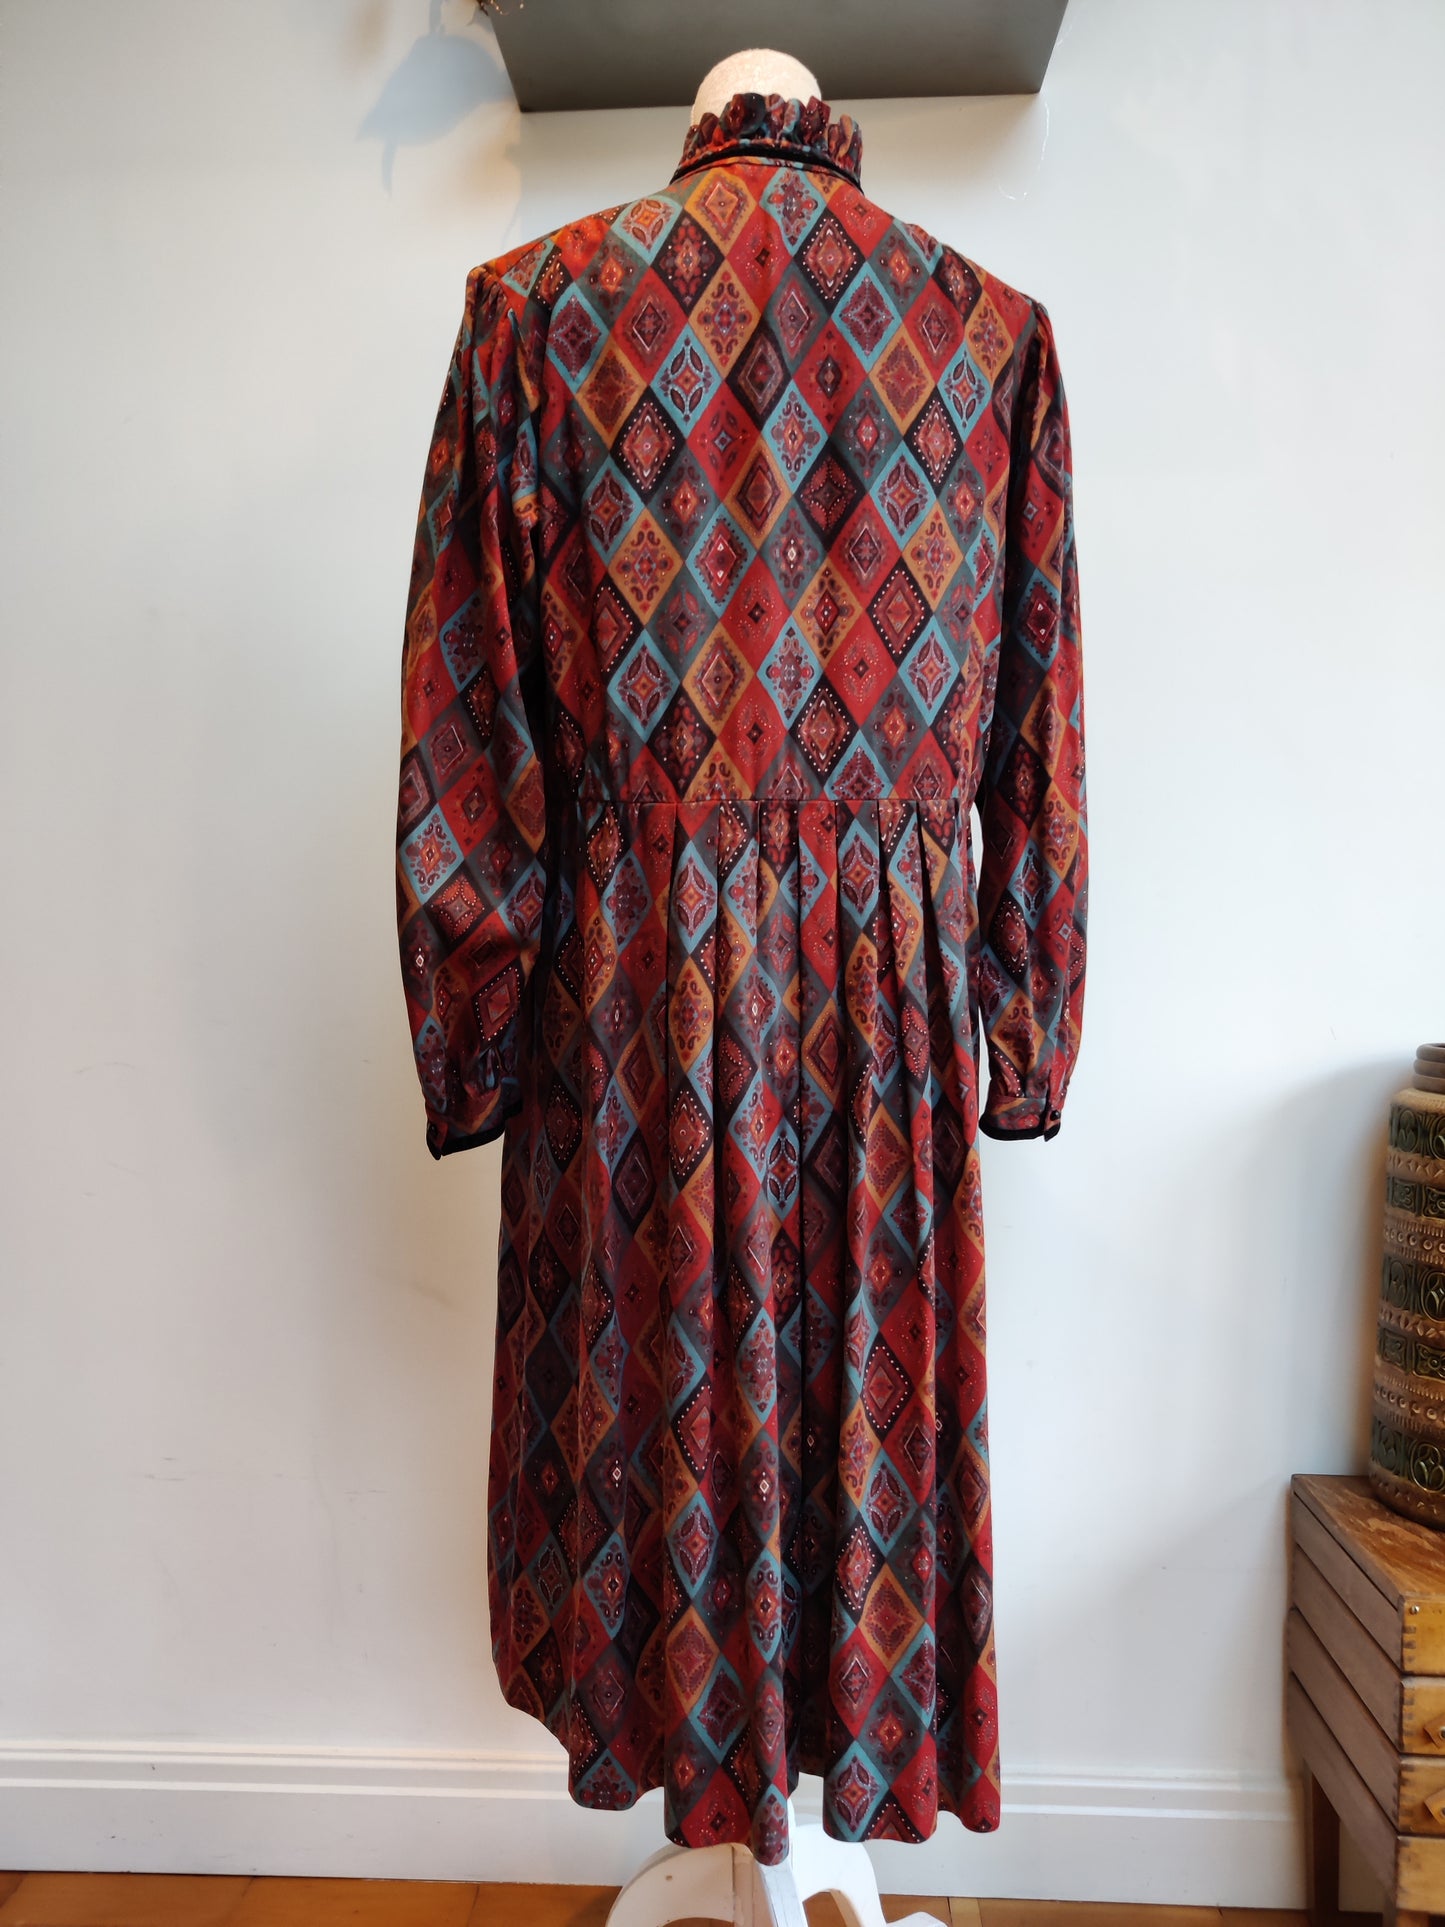 Vintage shirt dress with prairie style